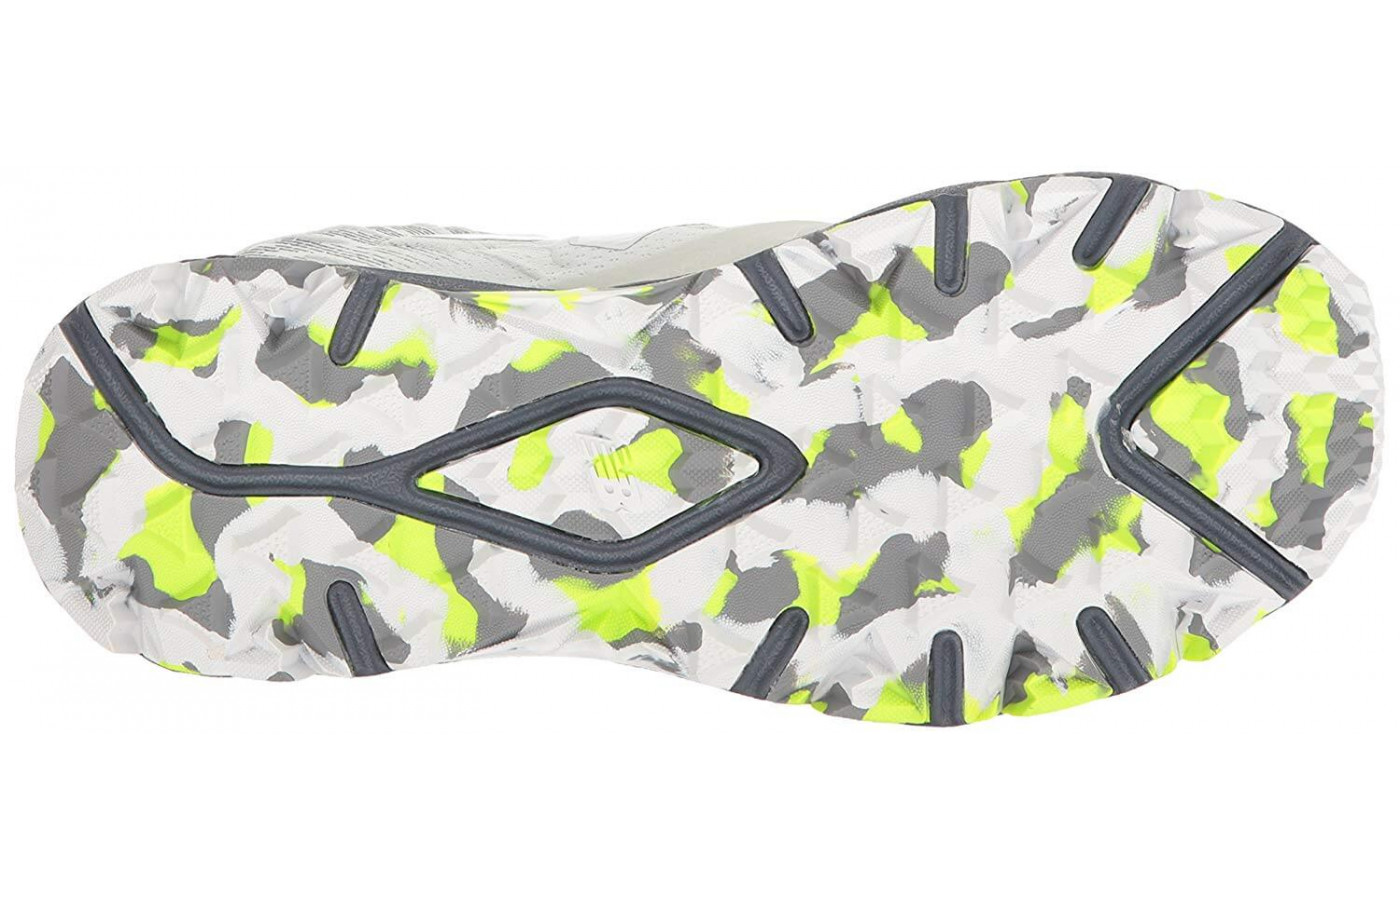 The AT tread outsole is ideal for rocky trails